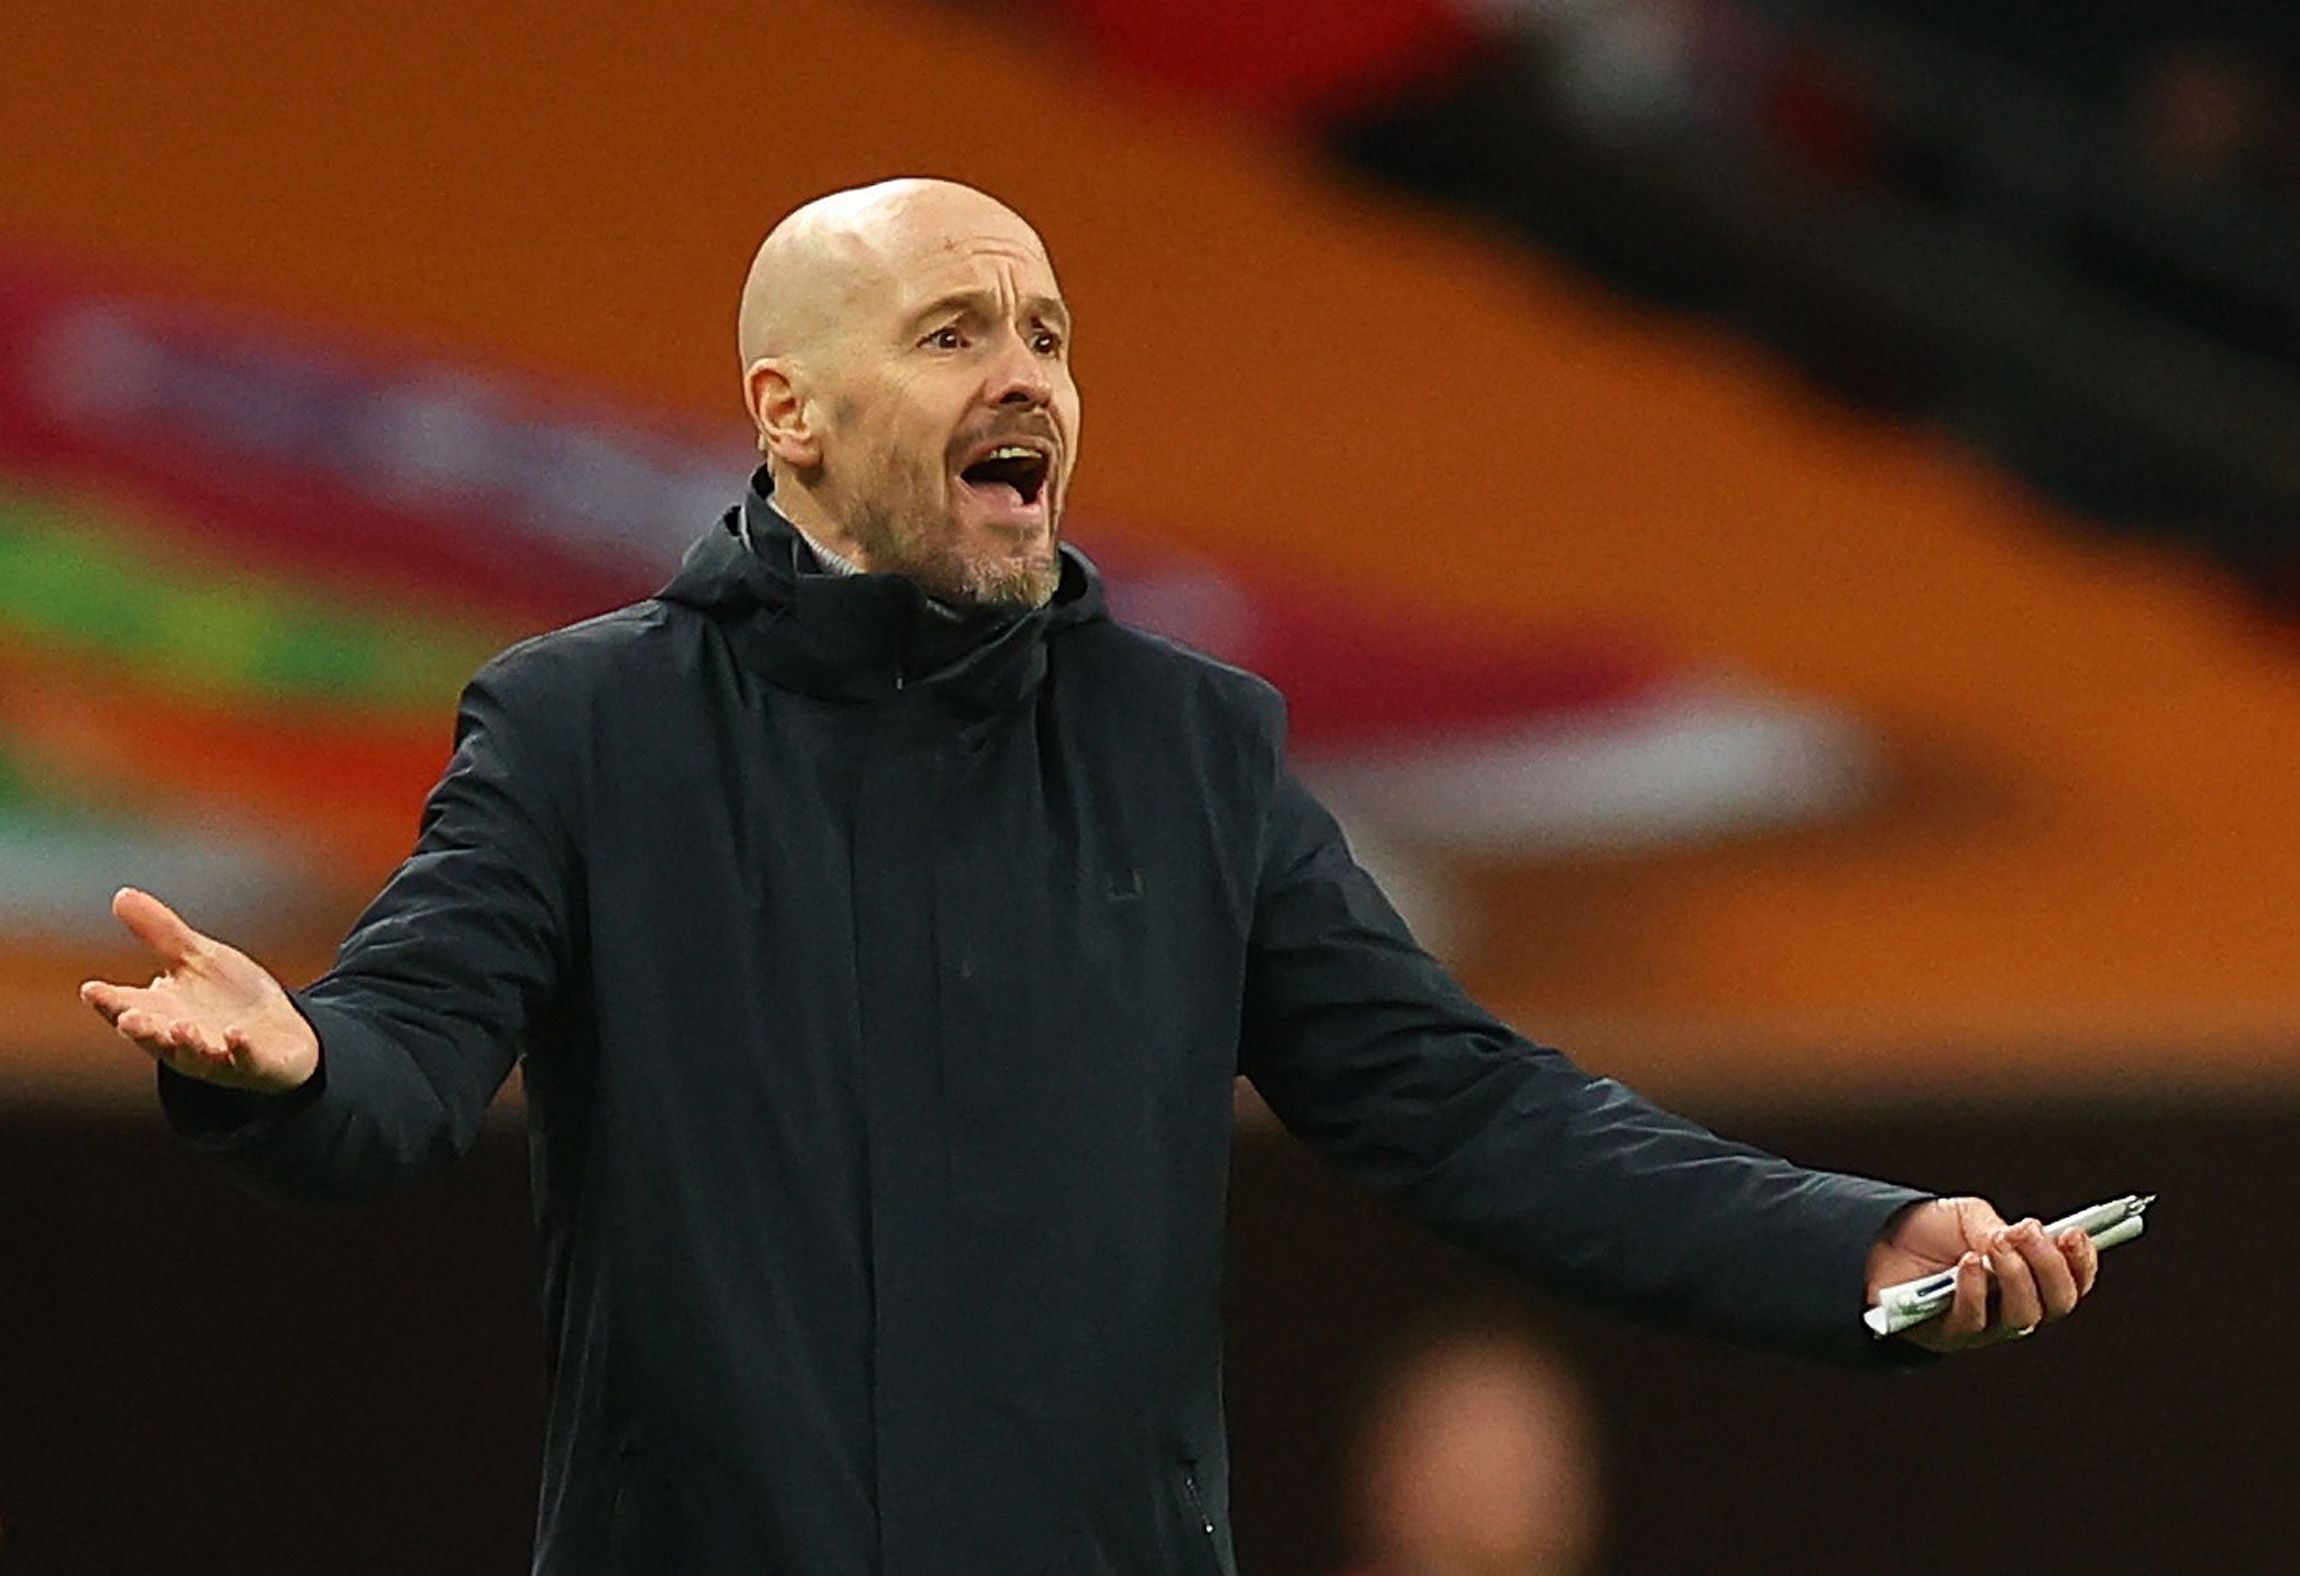 Manchester United manager Erik ten Hag animated during game